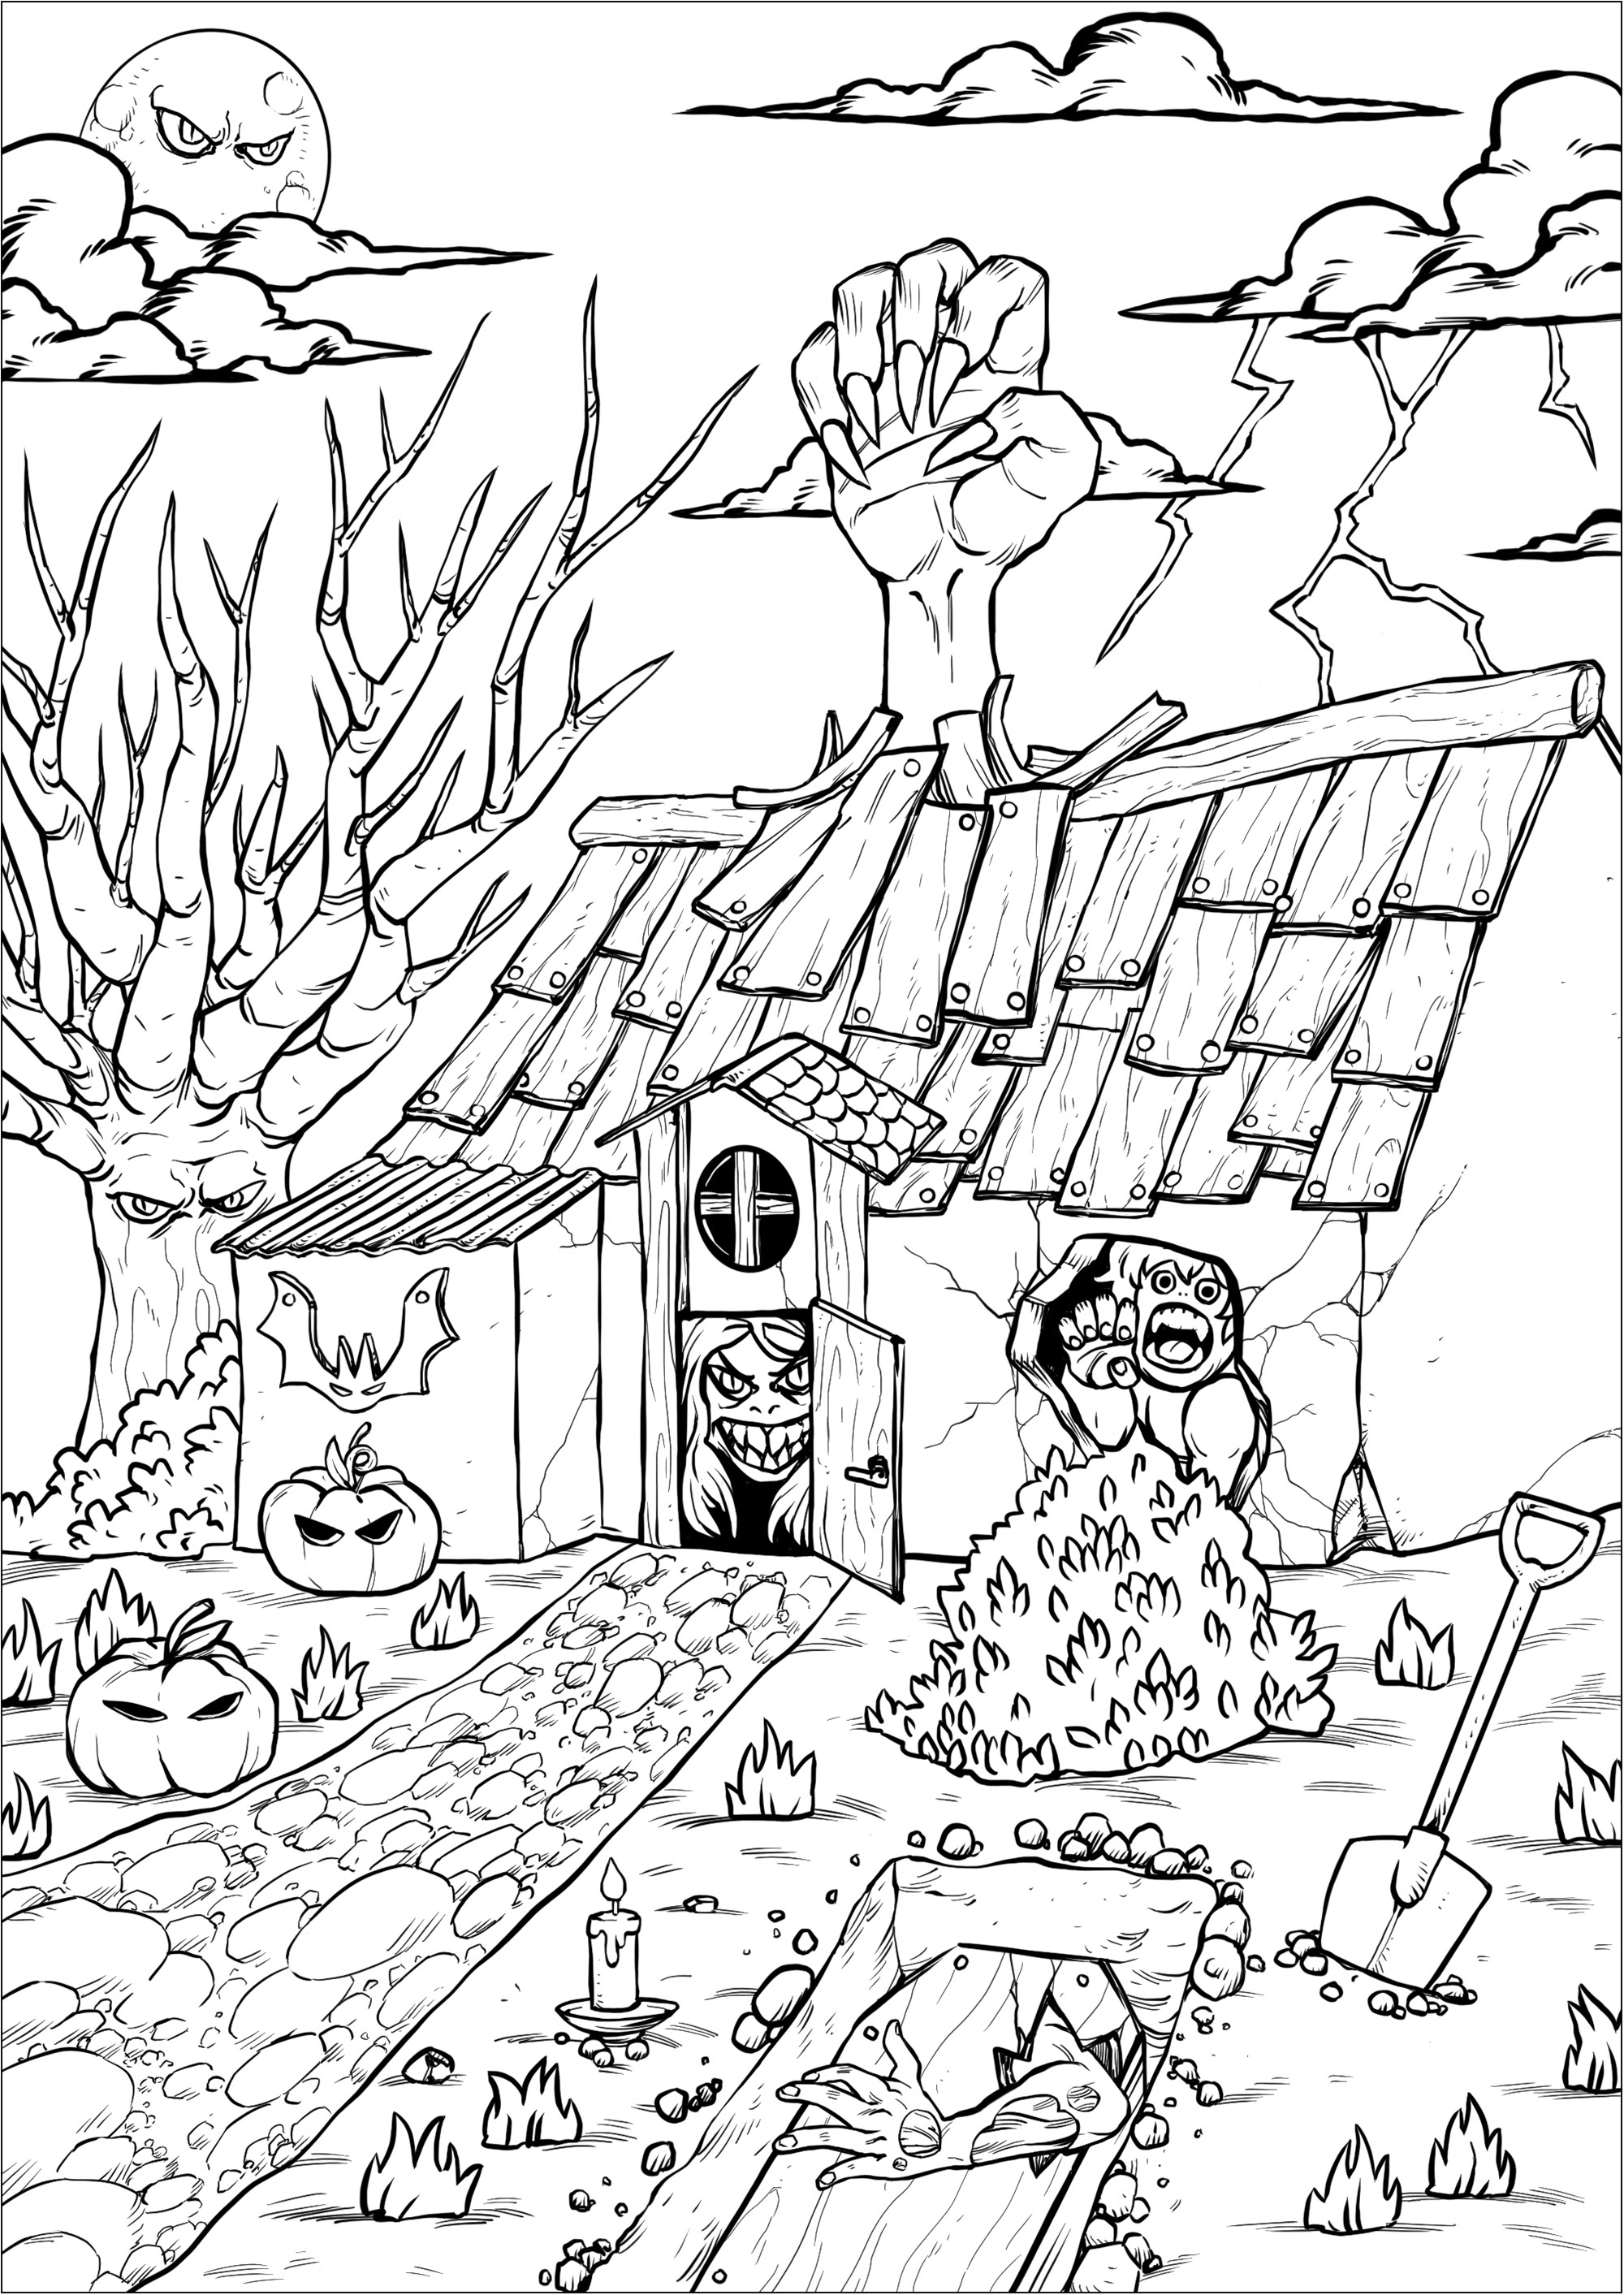 Scary creatures live in this strange haunted house... Will you dare to color them all in?. In this funny haunted house, scary creatures are ready to be colored in a terrifying way, Artist : SPZ artworks